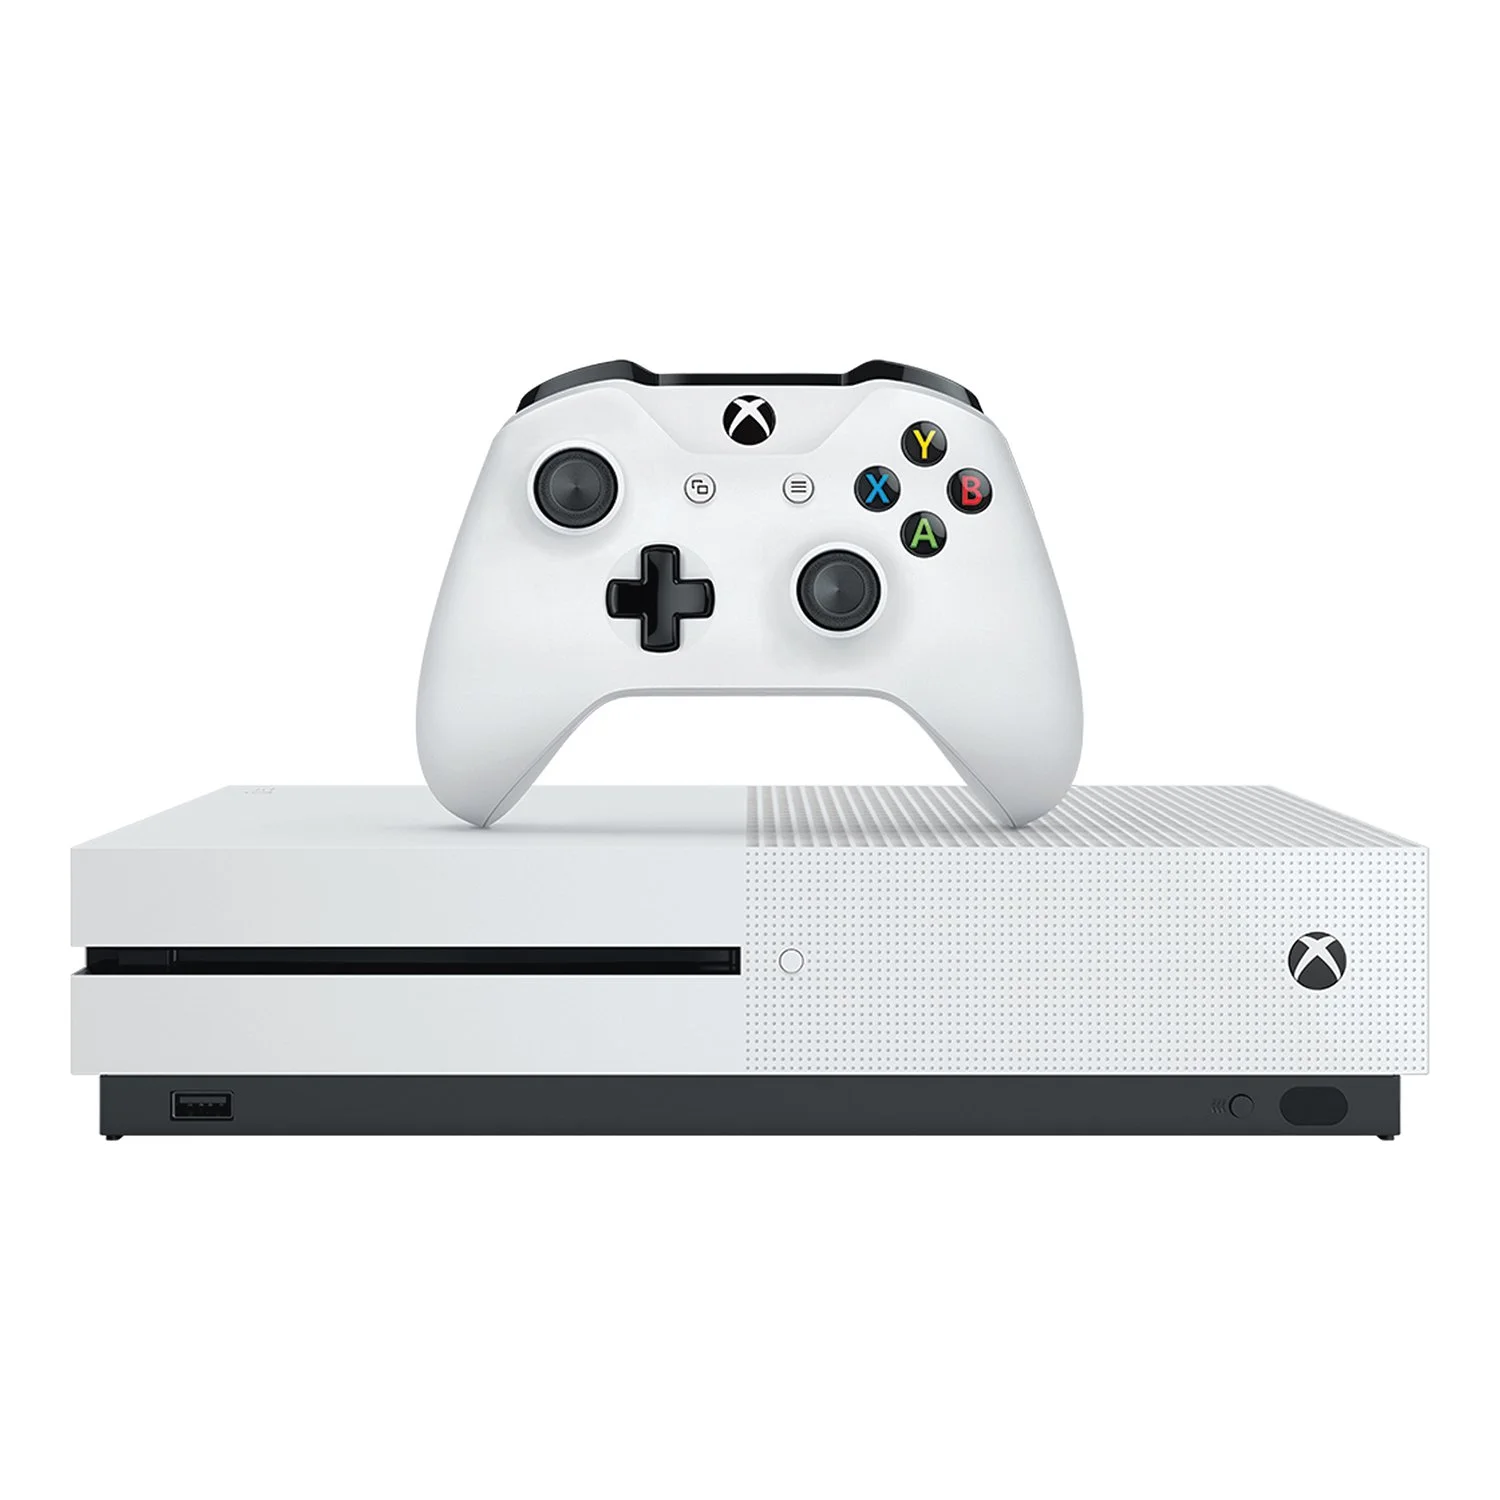 Microsoft Xbox Series S Fortnite Taco Tuesday Console - Consolevariations